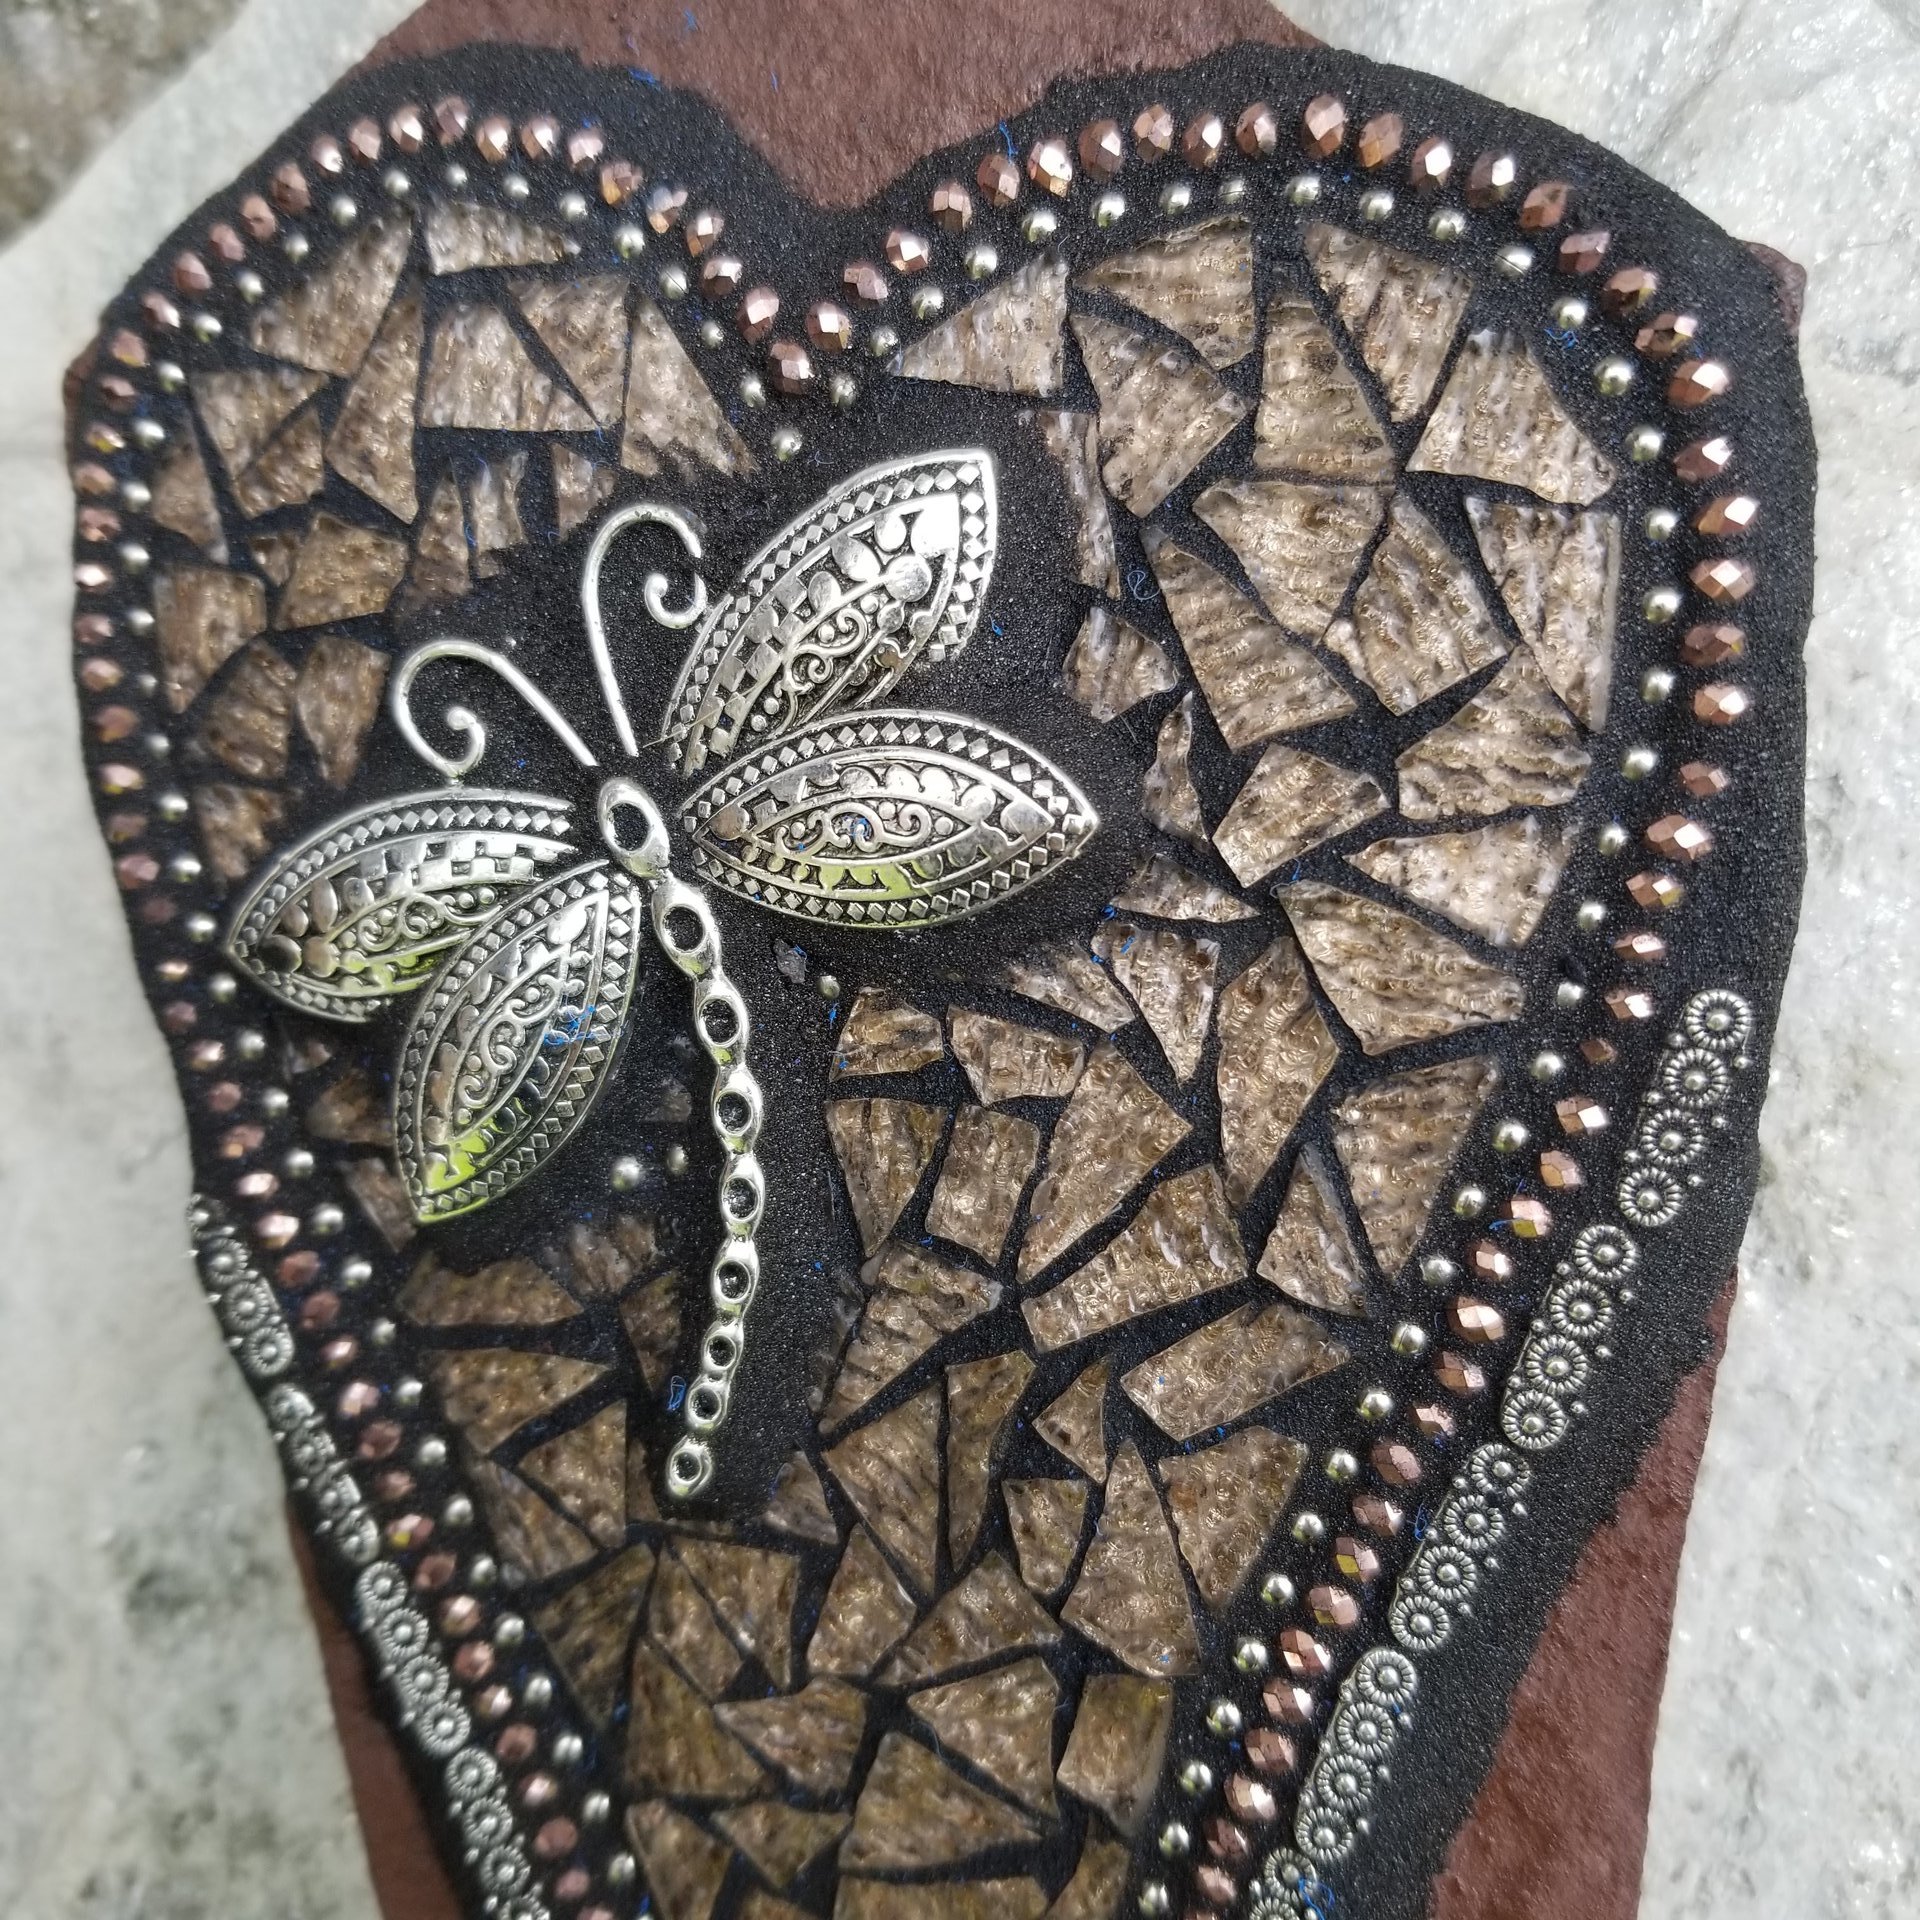 Copper Brown Heart, Wall Hanging Slate, Dragonfly Mosaic Garden Stone, Porch Decor, Wall Decor